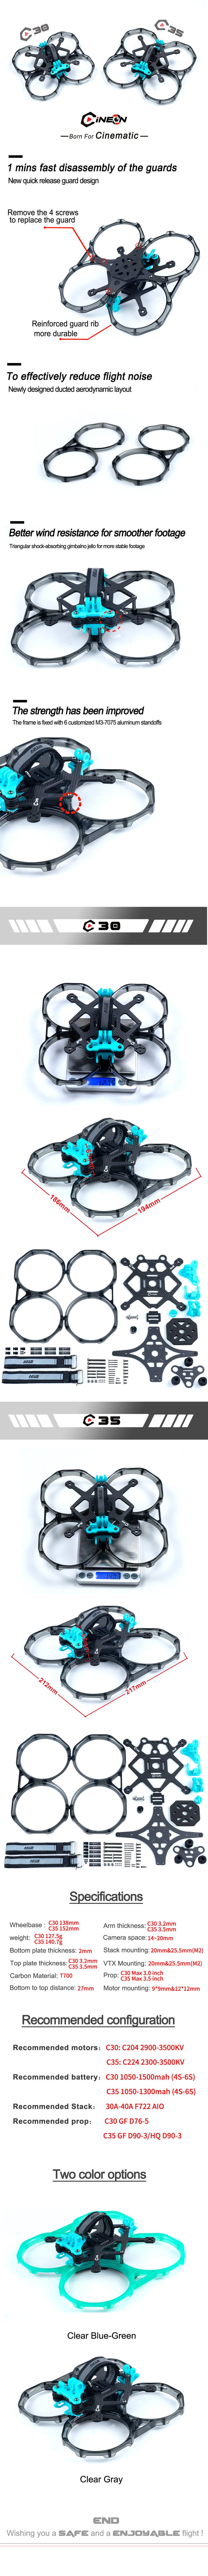 Axisflying C30 combo -Aluminum camera plates and GPS TPU- Get free 2 sets Props and 1 set guards  Axisflying Hot C30 3inch quadcopter small drone frame kit combo cinematic drone,cinewhoop drone,longrange drone,freestyle drone,fpv drone,fpv quads,3.5" cinematic drone,3.5" cinematic quads,3.5" cinewhoop quads,3"cinewhoop quads,3"cinematic quads,2.5" cinewhoop quads,2.5" cinewhoop drones,2.5" indoor quads,2" indoor quads,2" indoor drones,the same as dji quads,fpv drone frame,drone frame quadcopter,oem drone frame,small drone frame